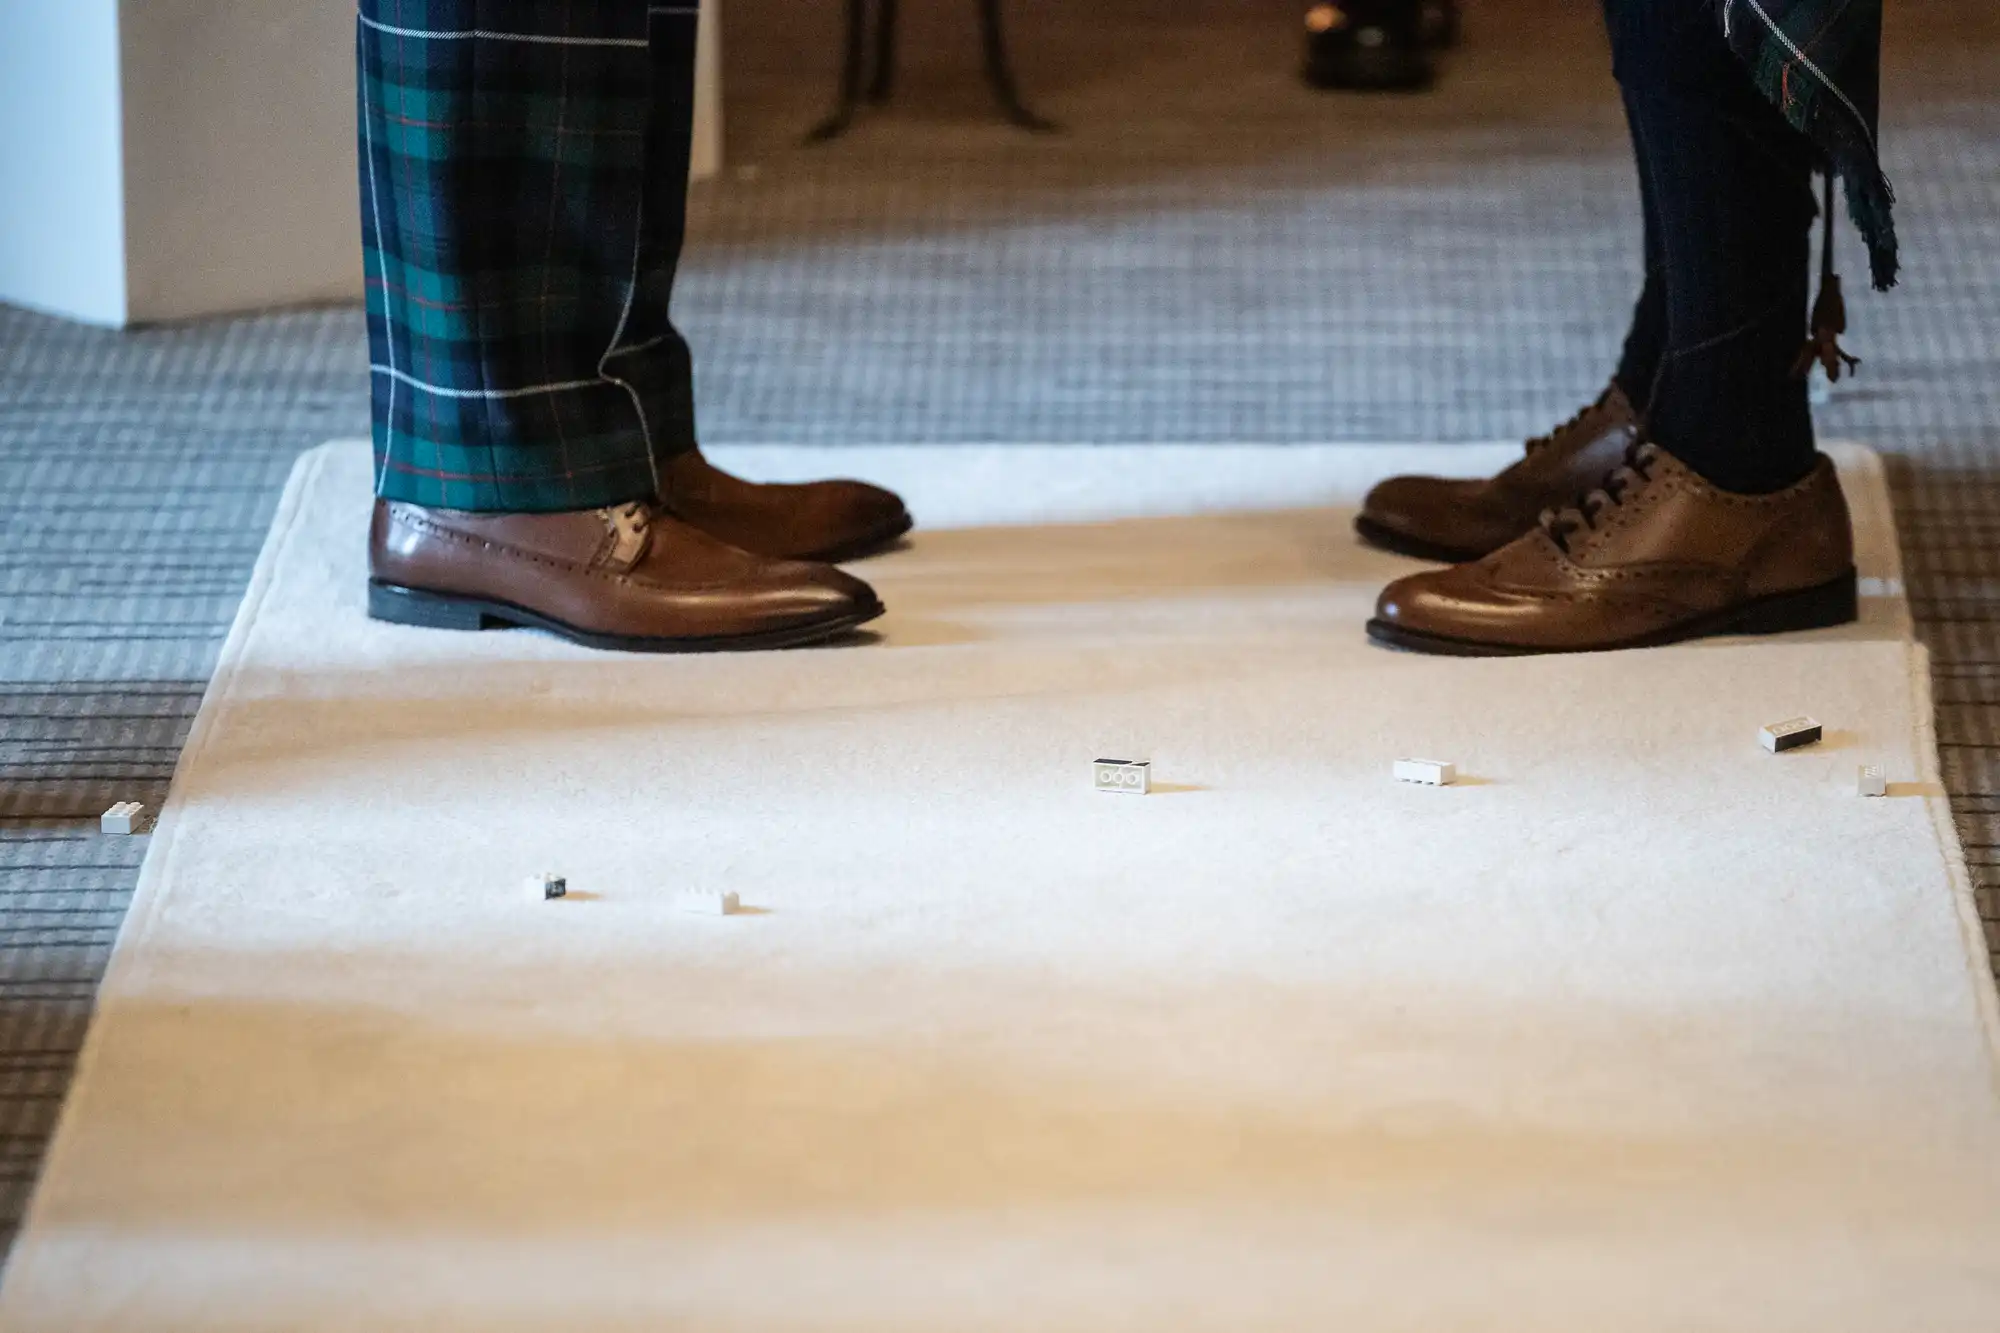 Two individuals wearing brown shoes are standing on a beige carpet, with small scattered items on the carpet near their feet.